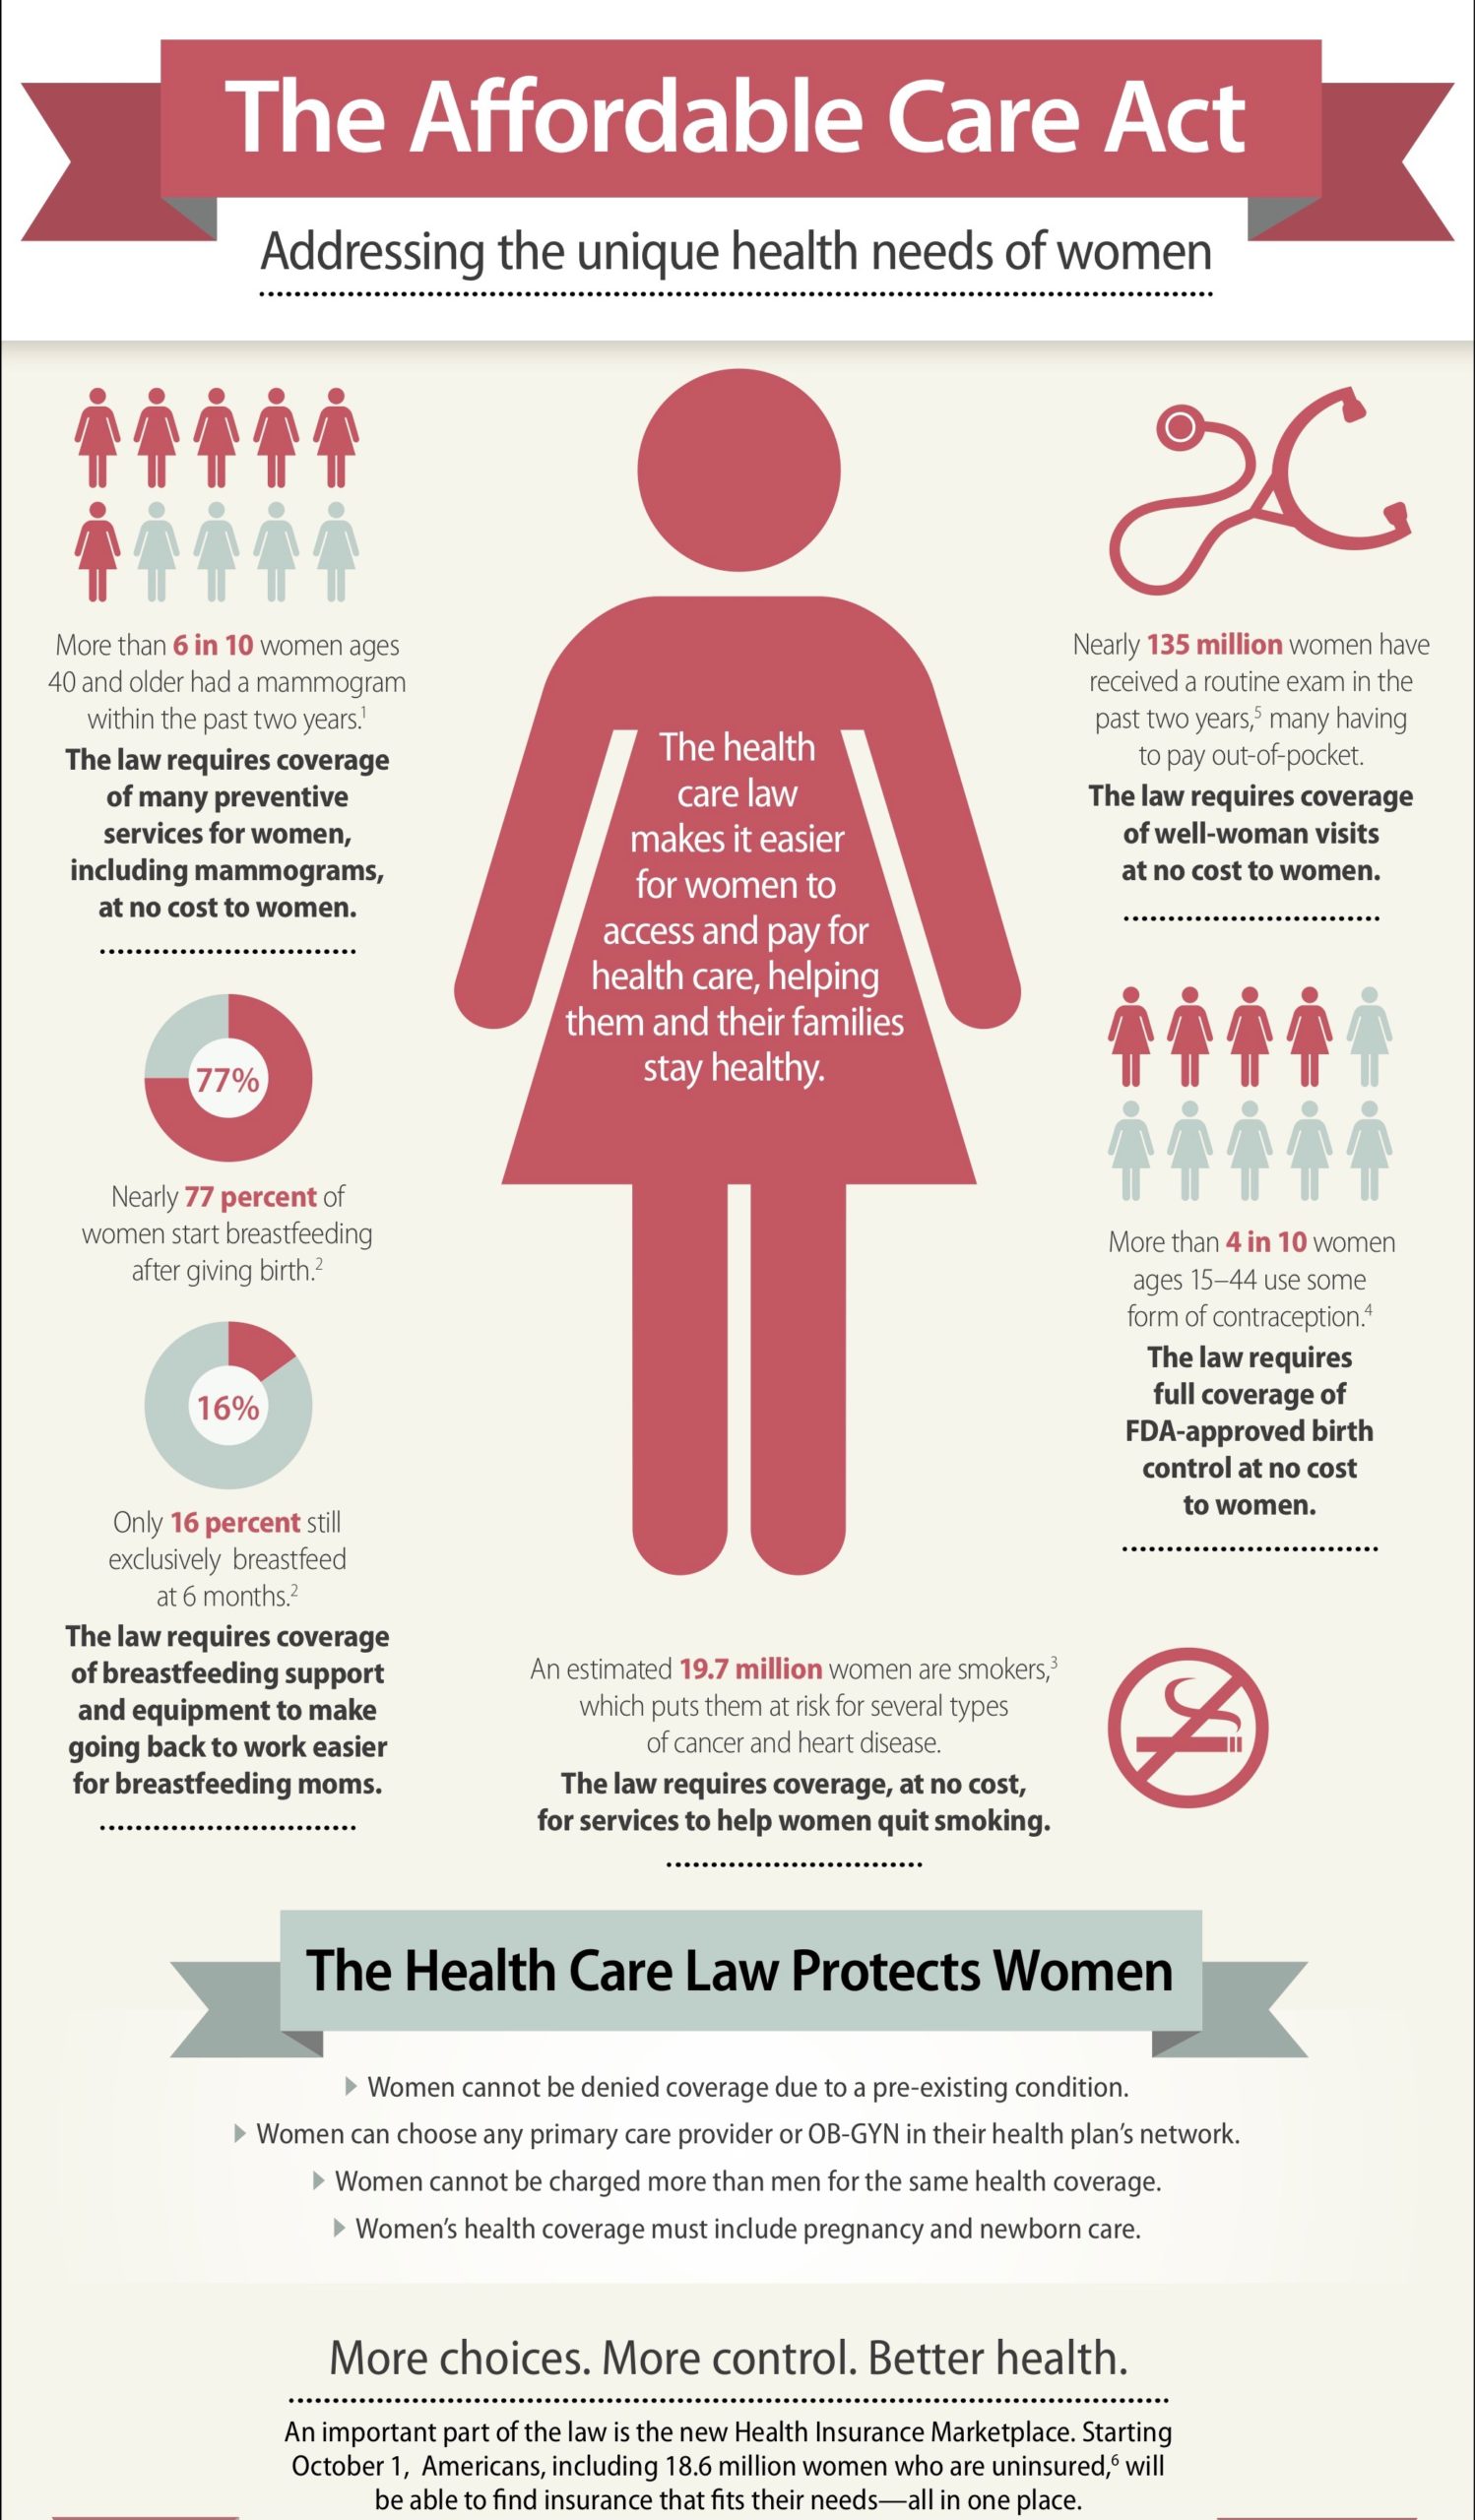 The Affordable Care Act- unique coverage for women